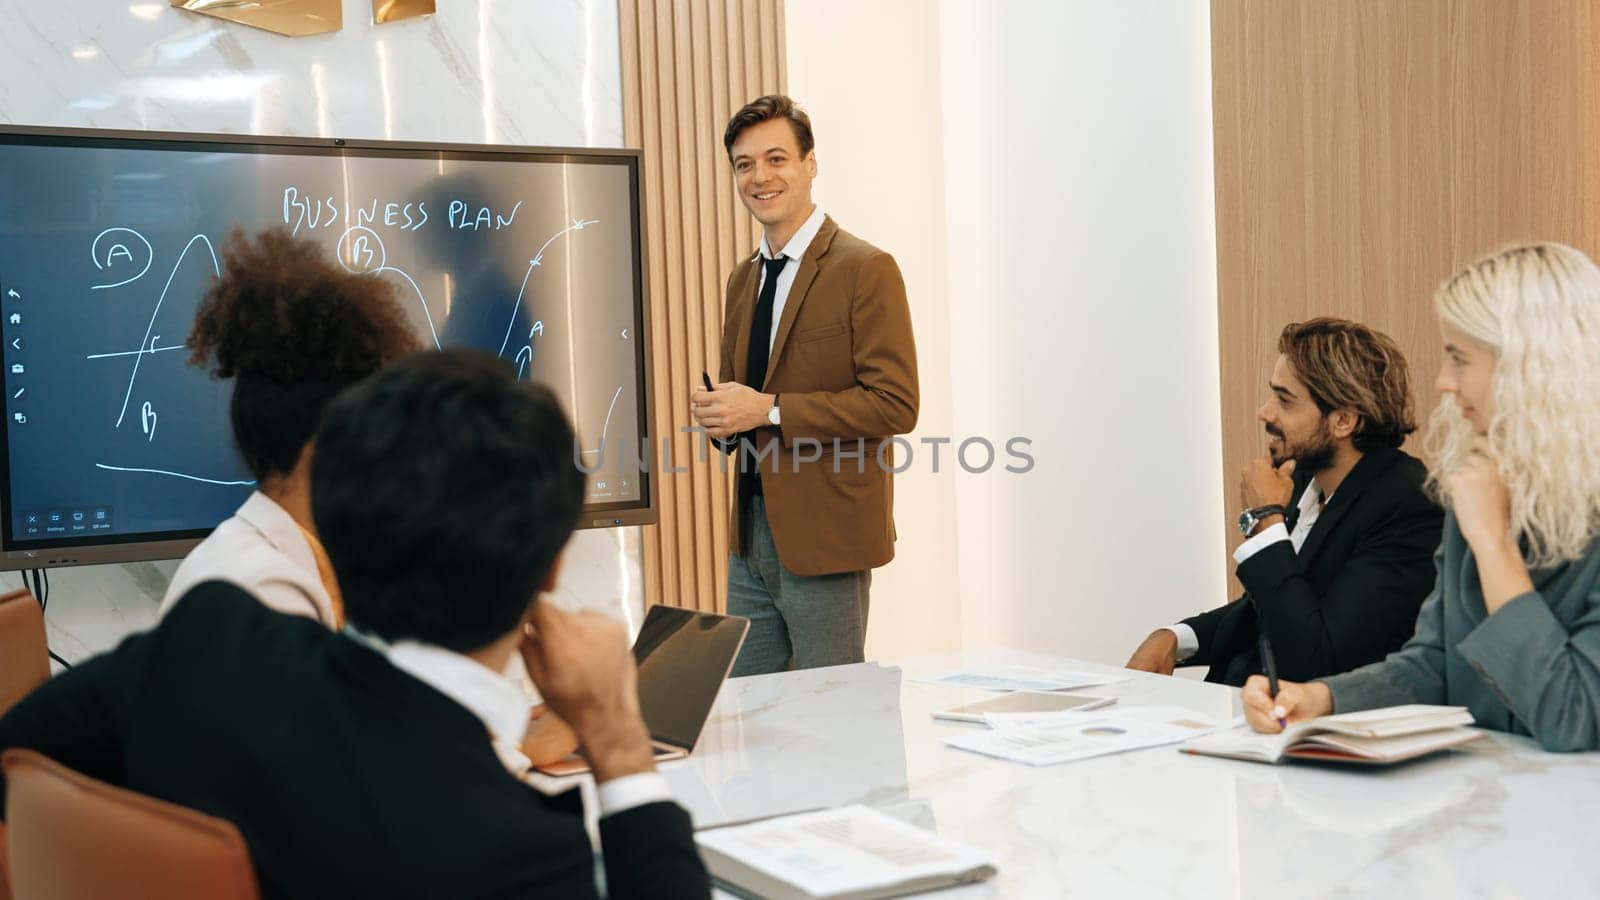 Presentation in ornamented meeting room with business professionals by biancoblue